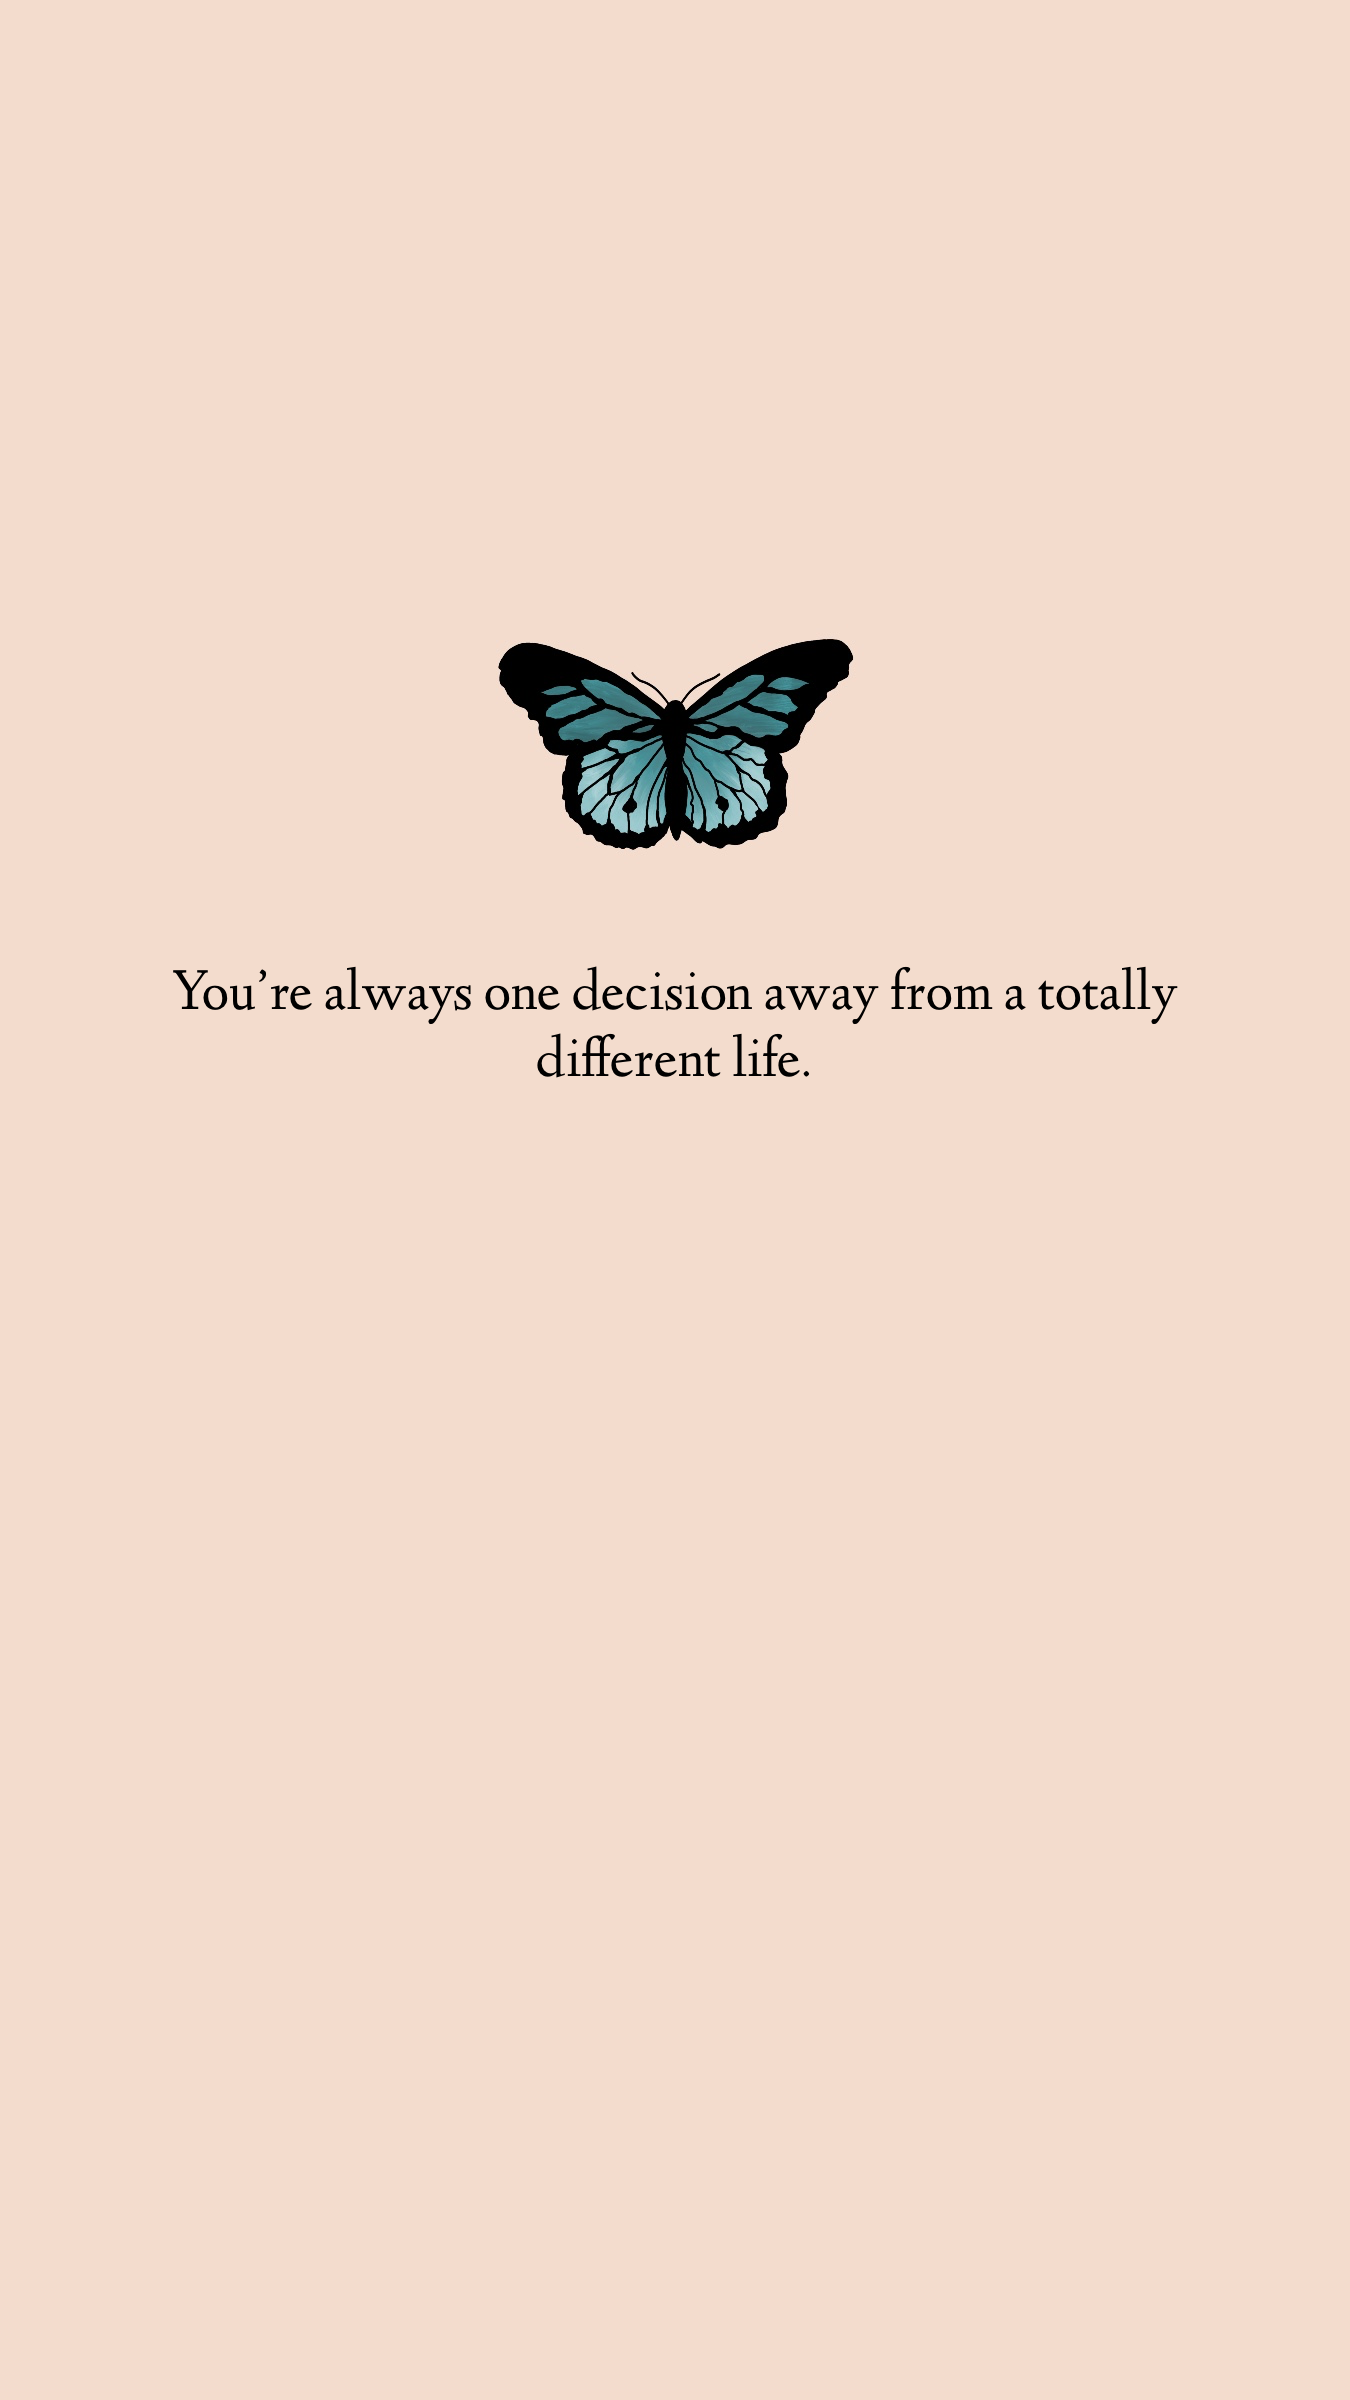 Simple Butterfly Wallpaper Quote. Wallpaper quotes, Simple butterfly, Butterfly wallpaper